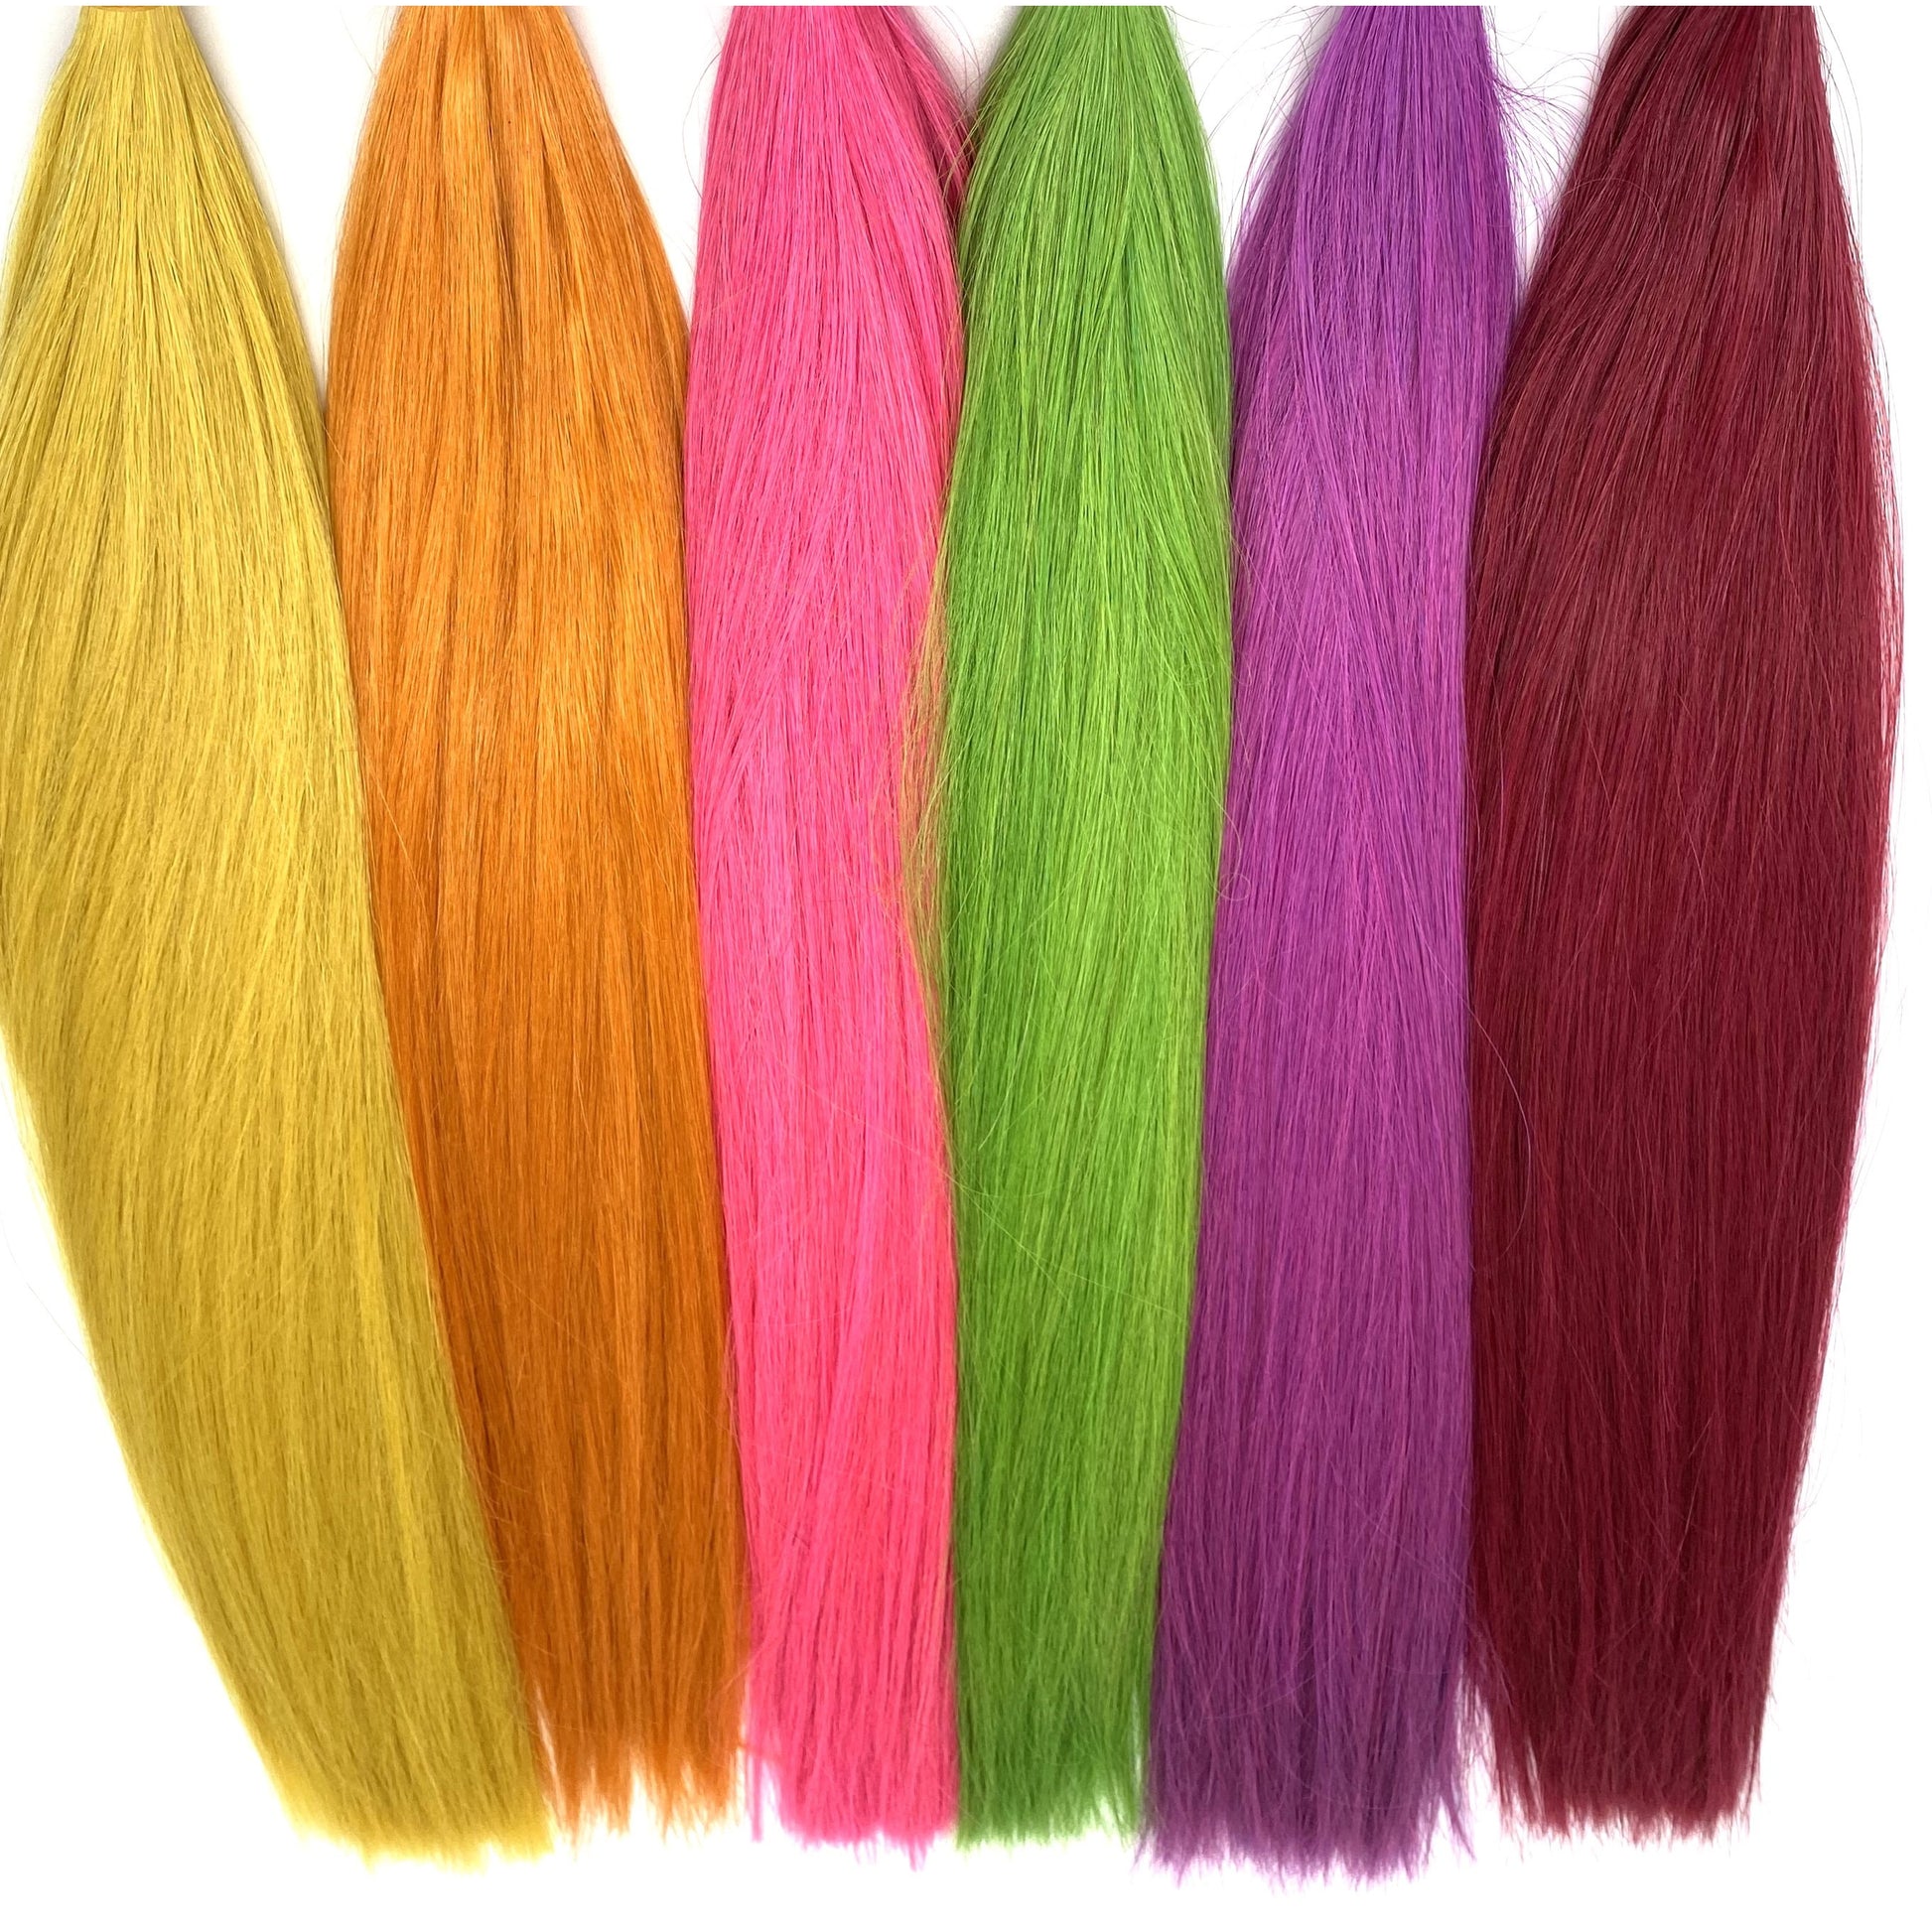 REMY Human Hair Fantasy colors - VIP Extensions